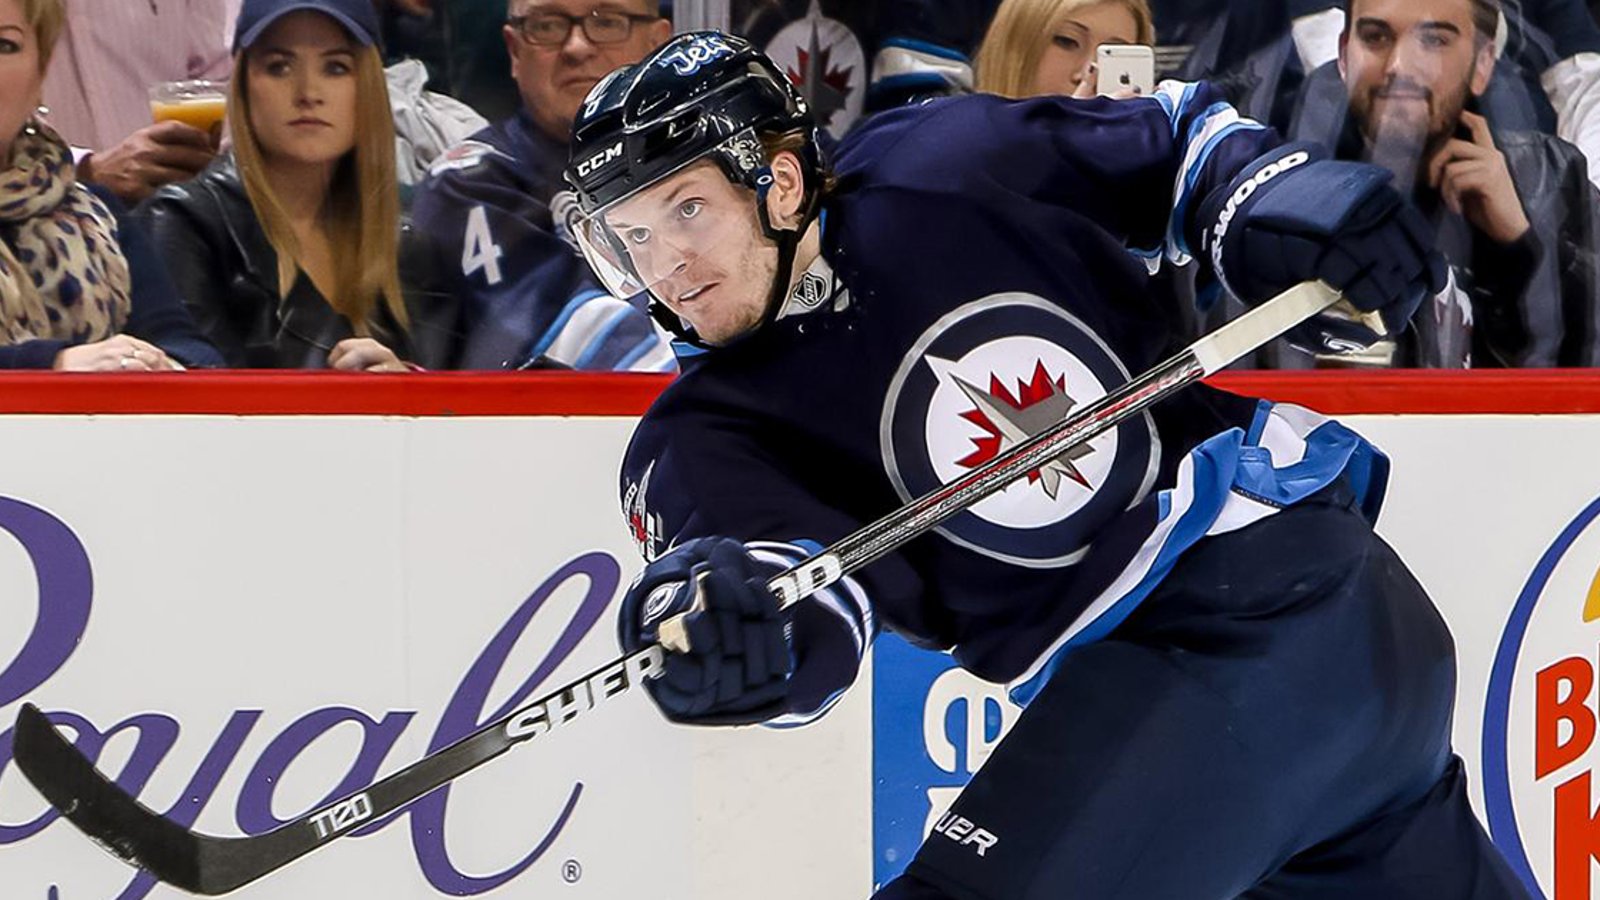 Report: More trouble brewing between the Jets and Trouba